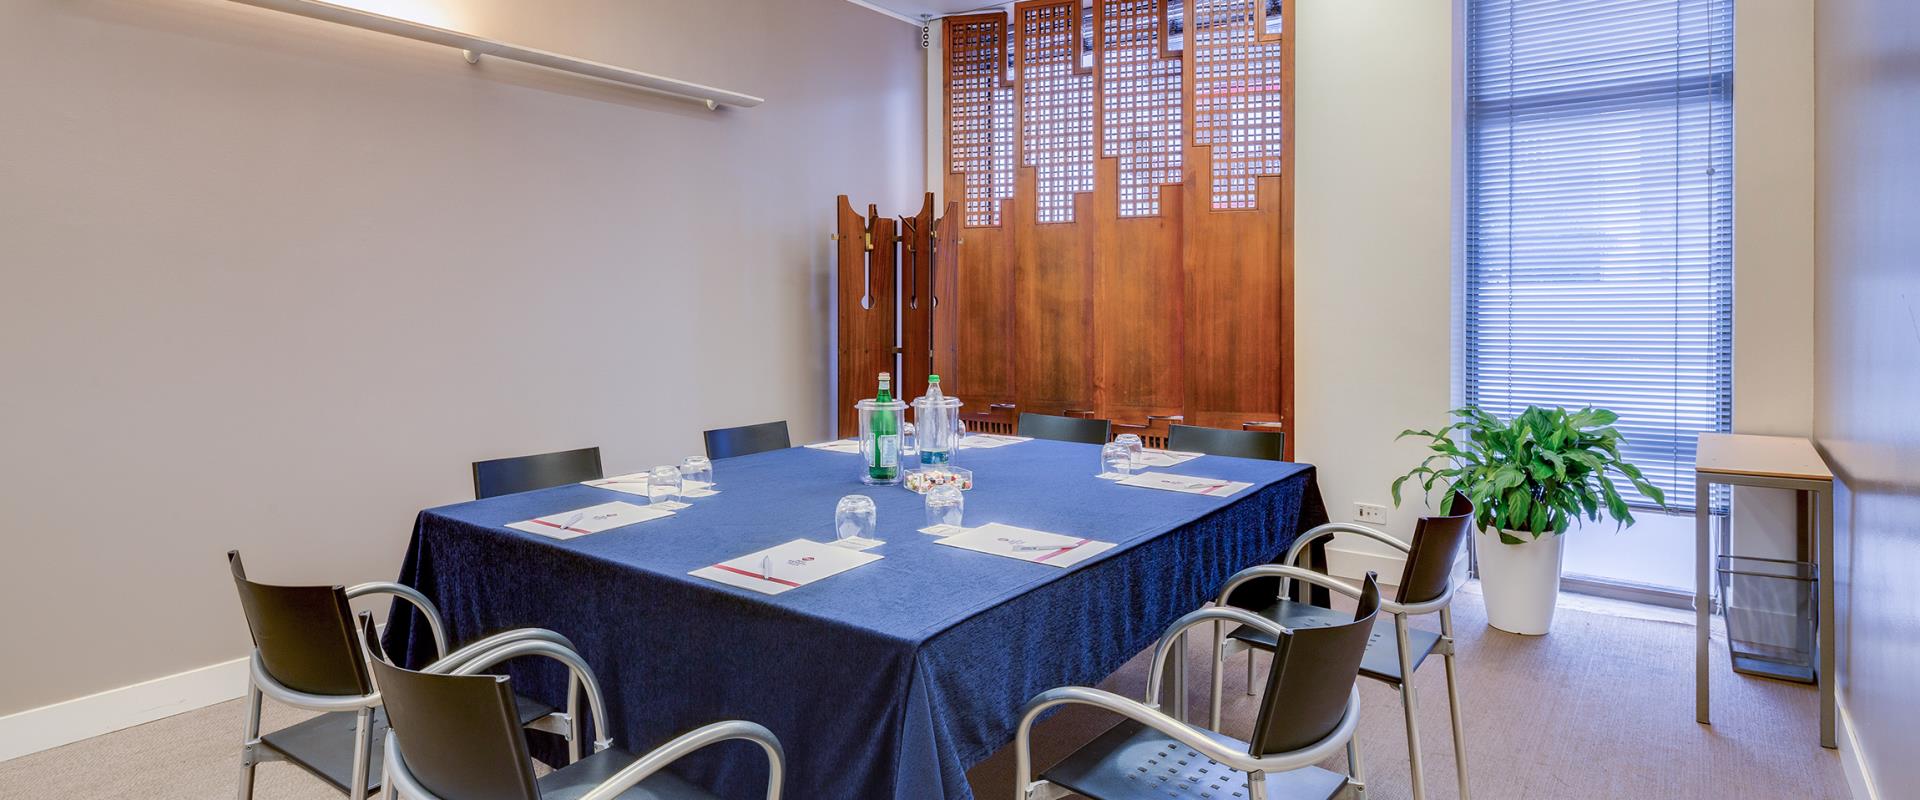 Plan your meeting near Venice with BW Plus Hotel Bologna in Mestre.